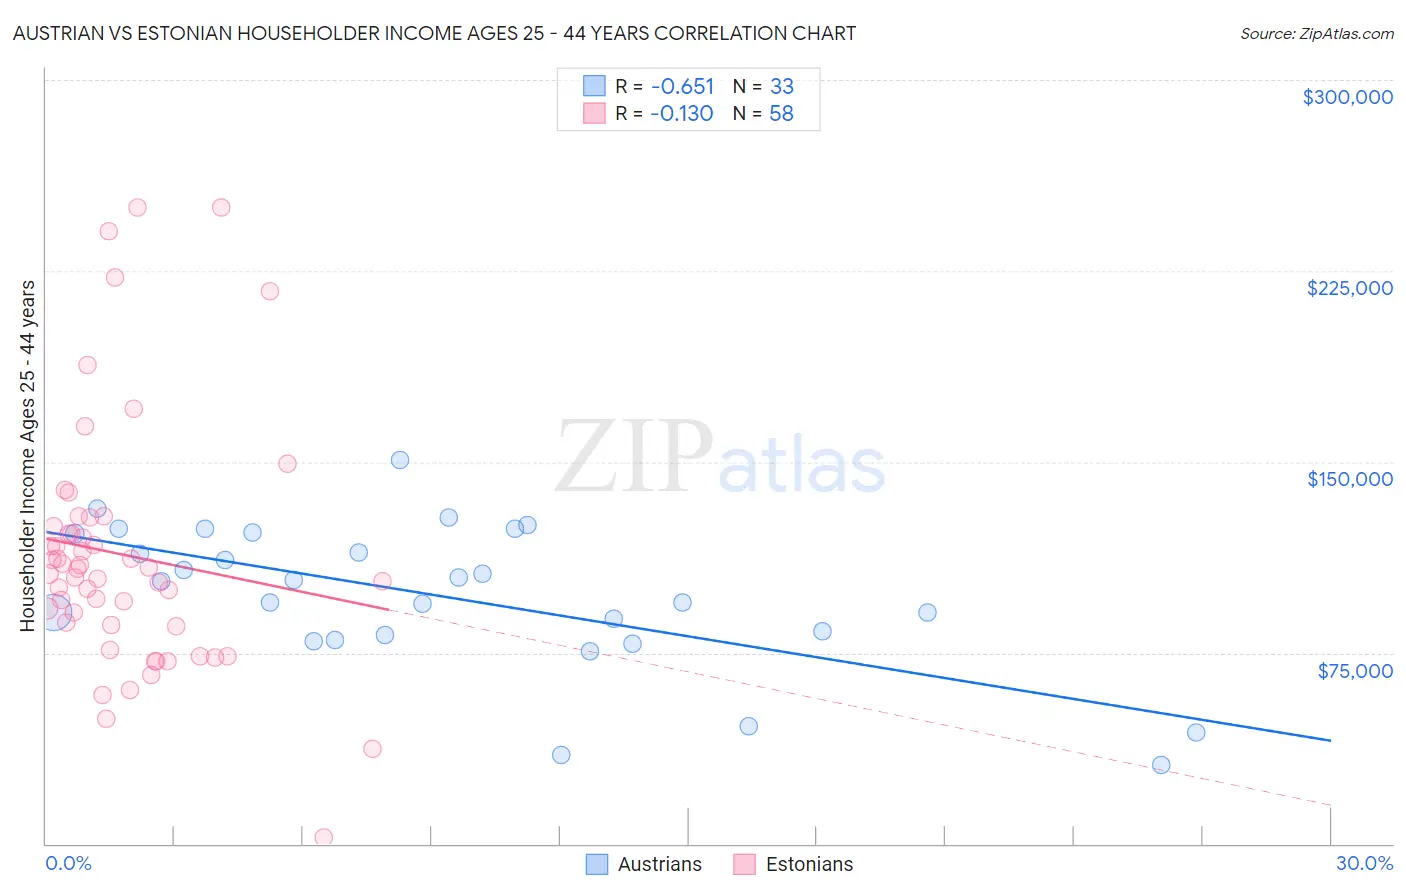 Austrian vs Estonian Householder Income Ages 25 - 44 years